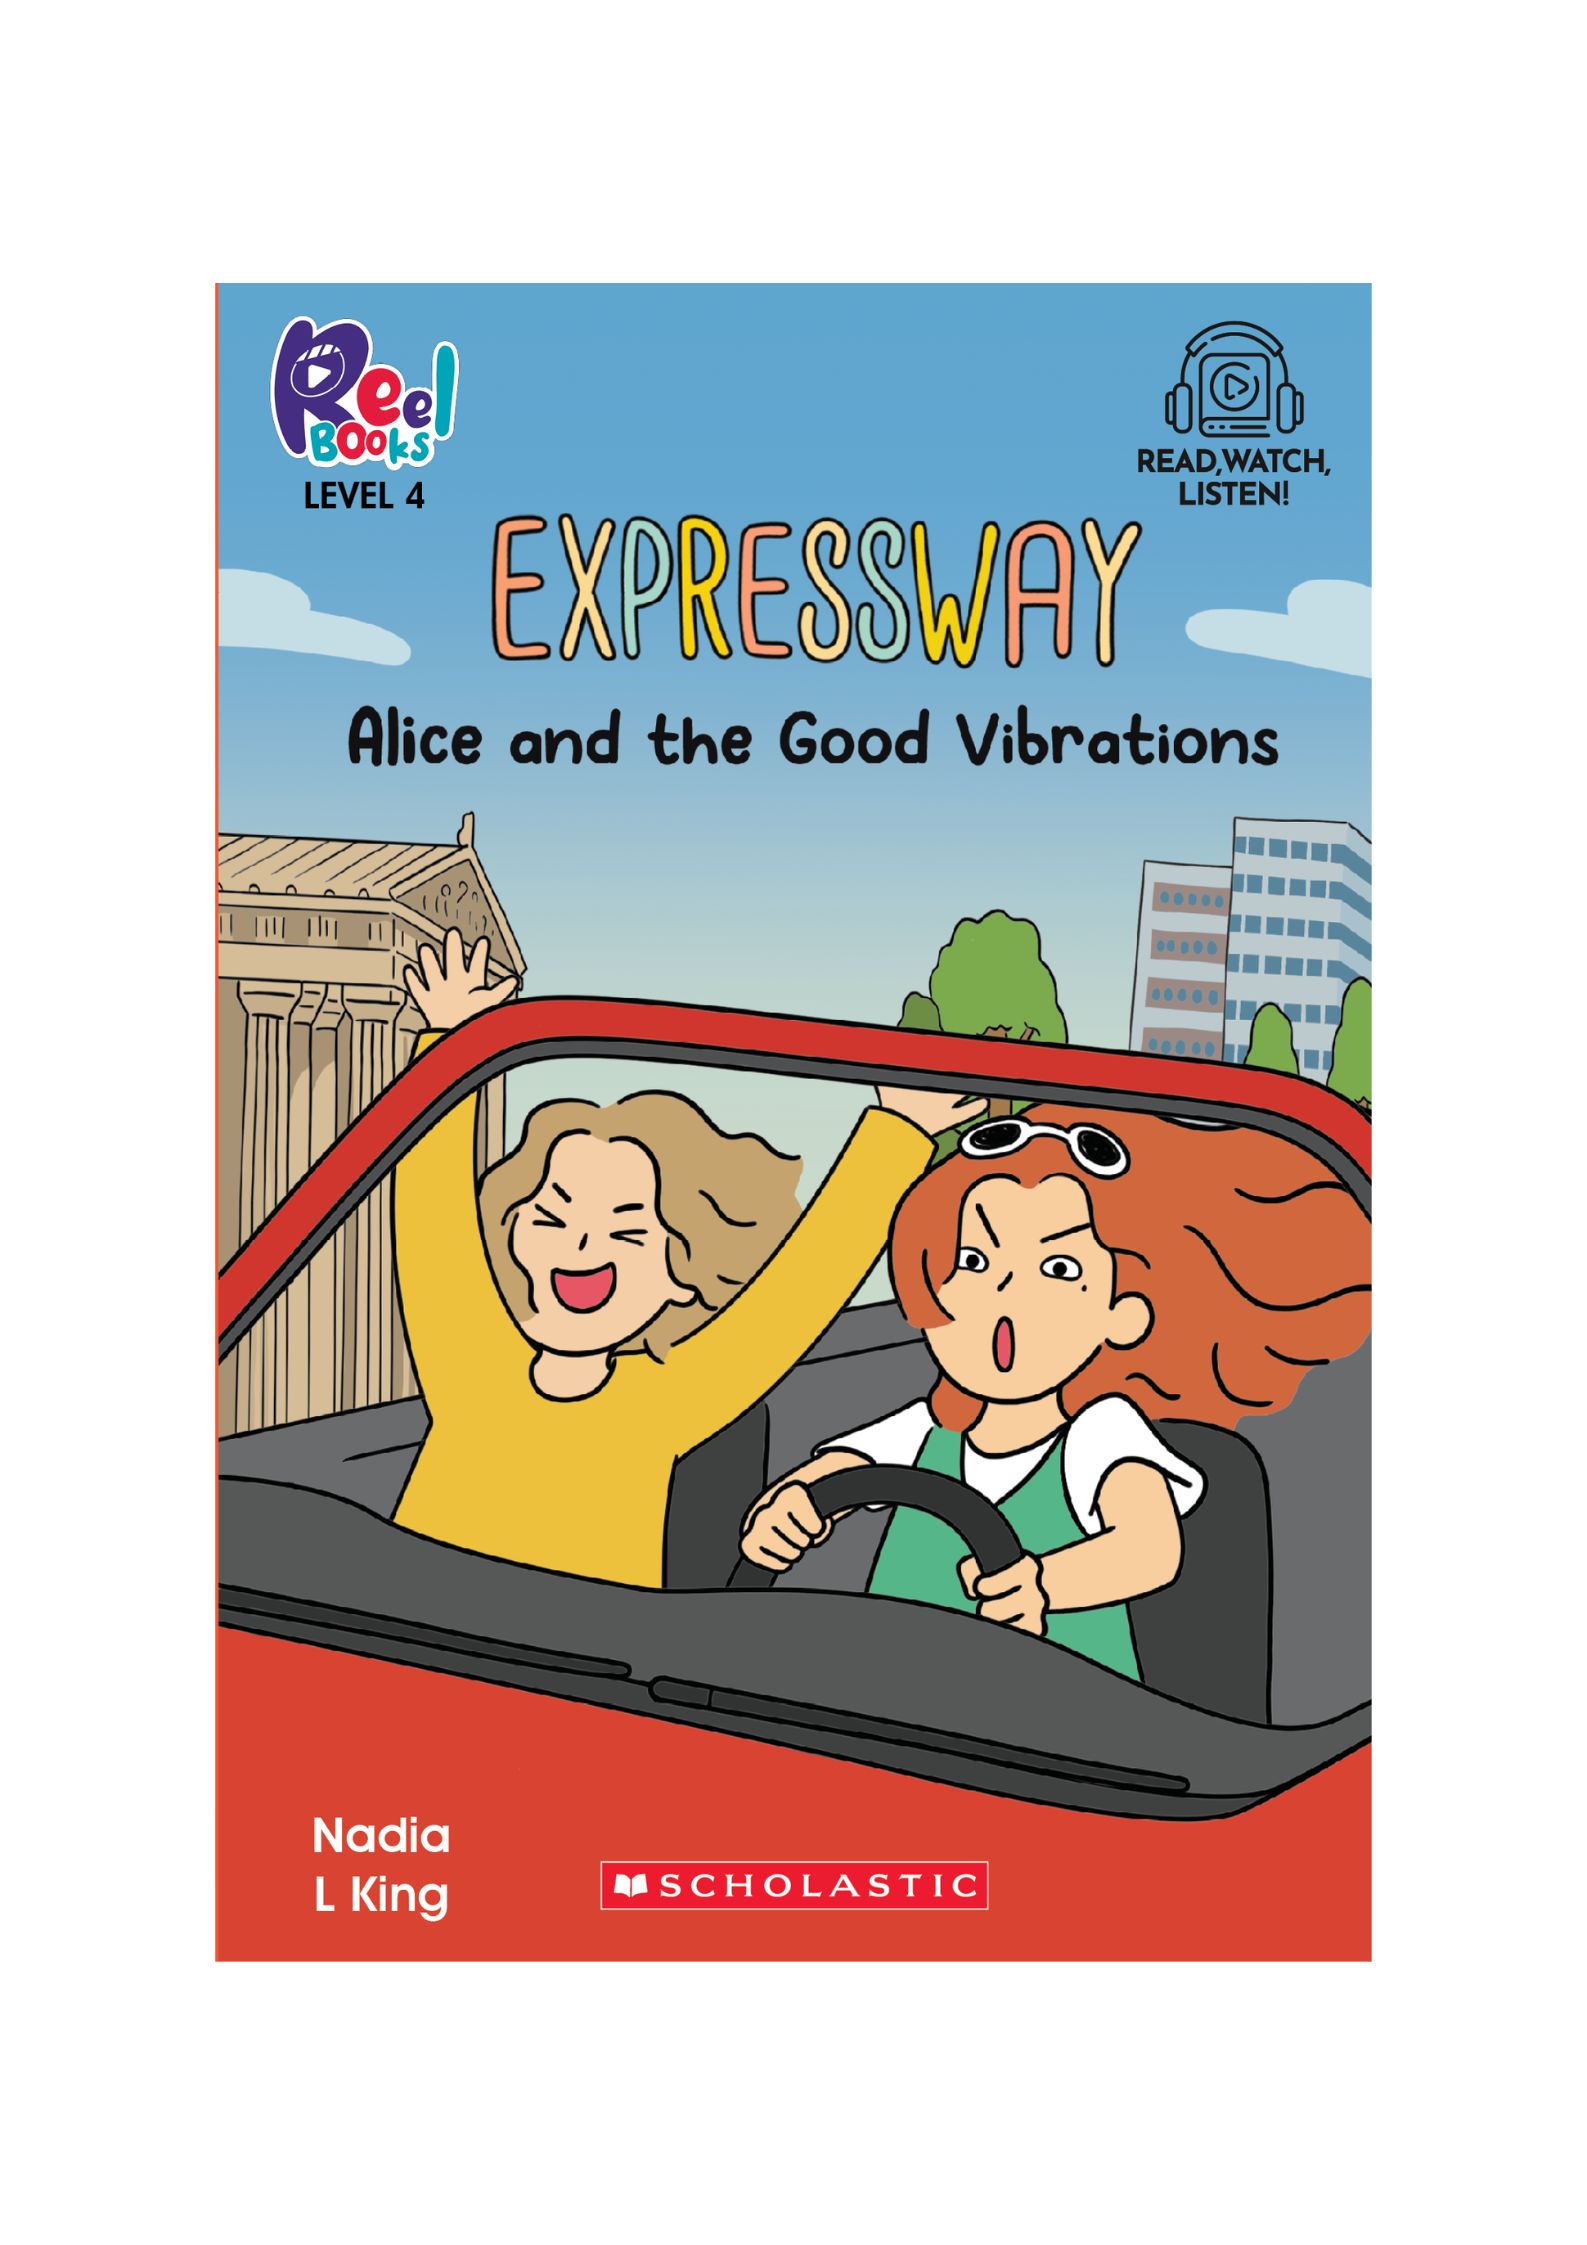 Expressway #2: Alice and the Good Vibrations